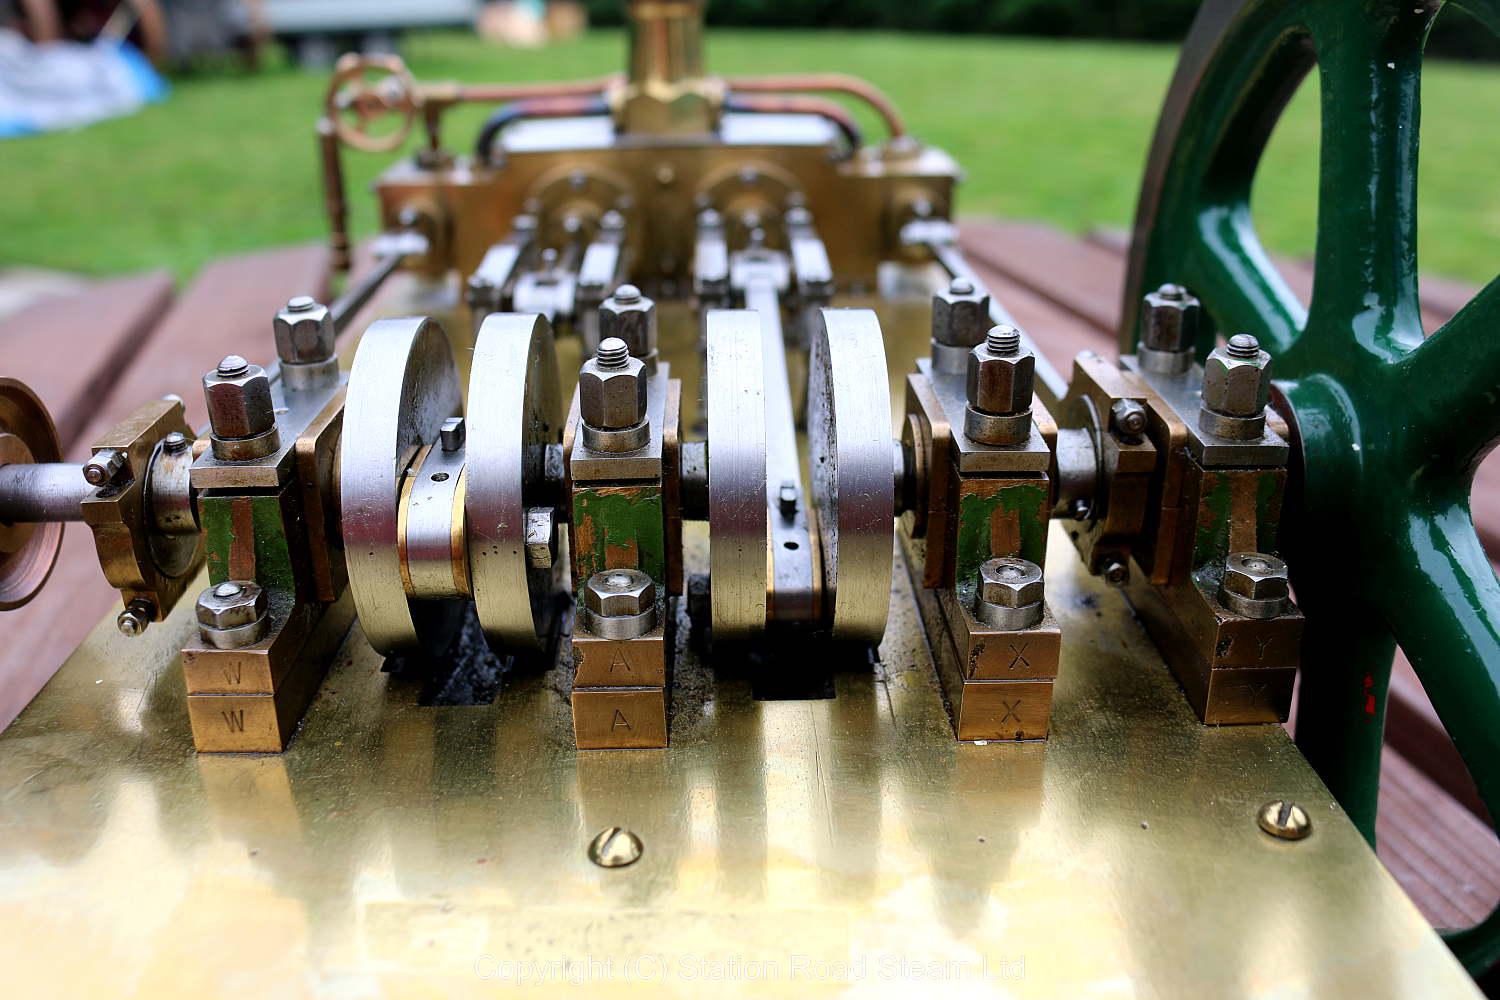 Horizontal twin mill engine on brass supports with hardwood base